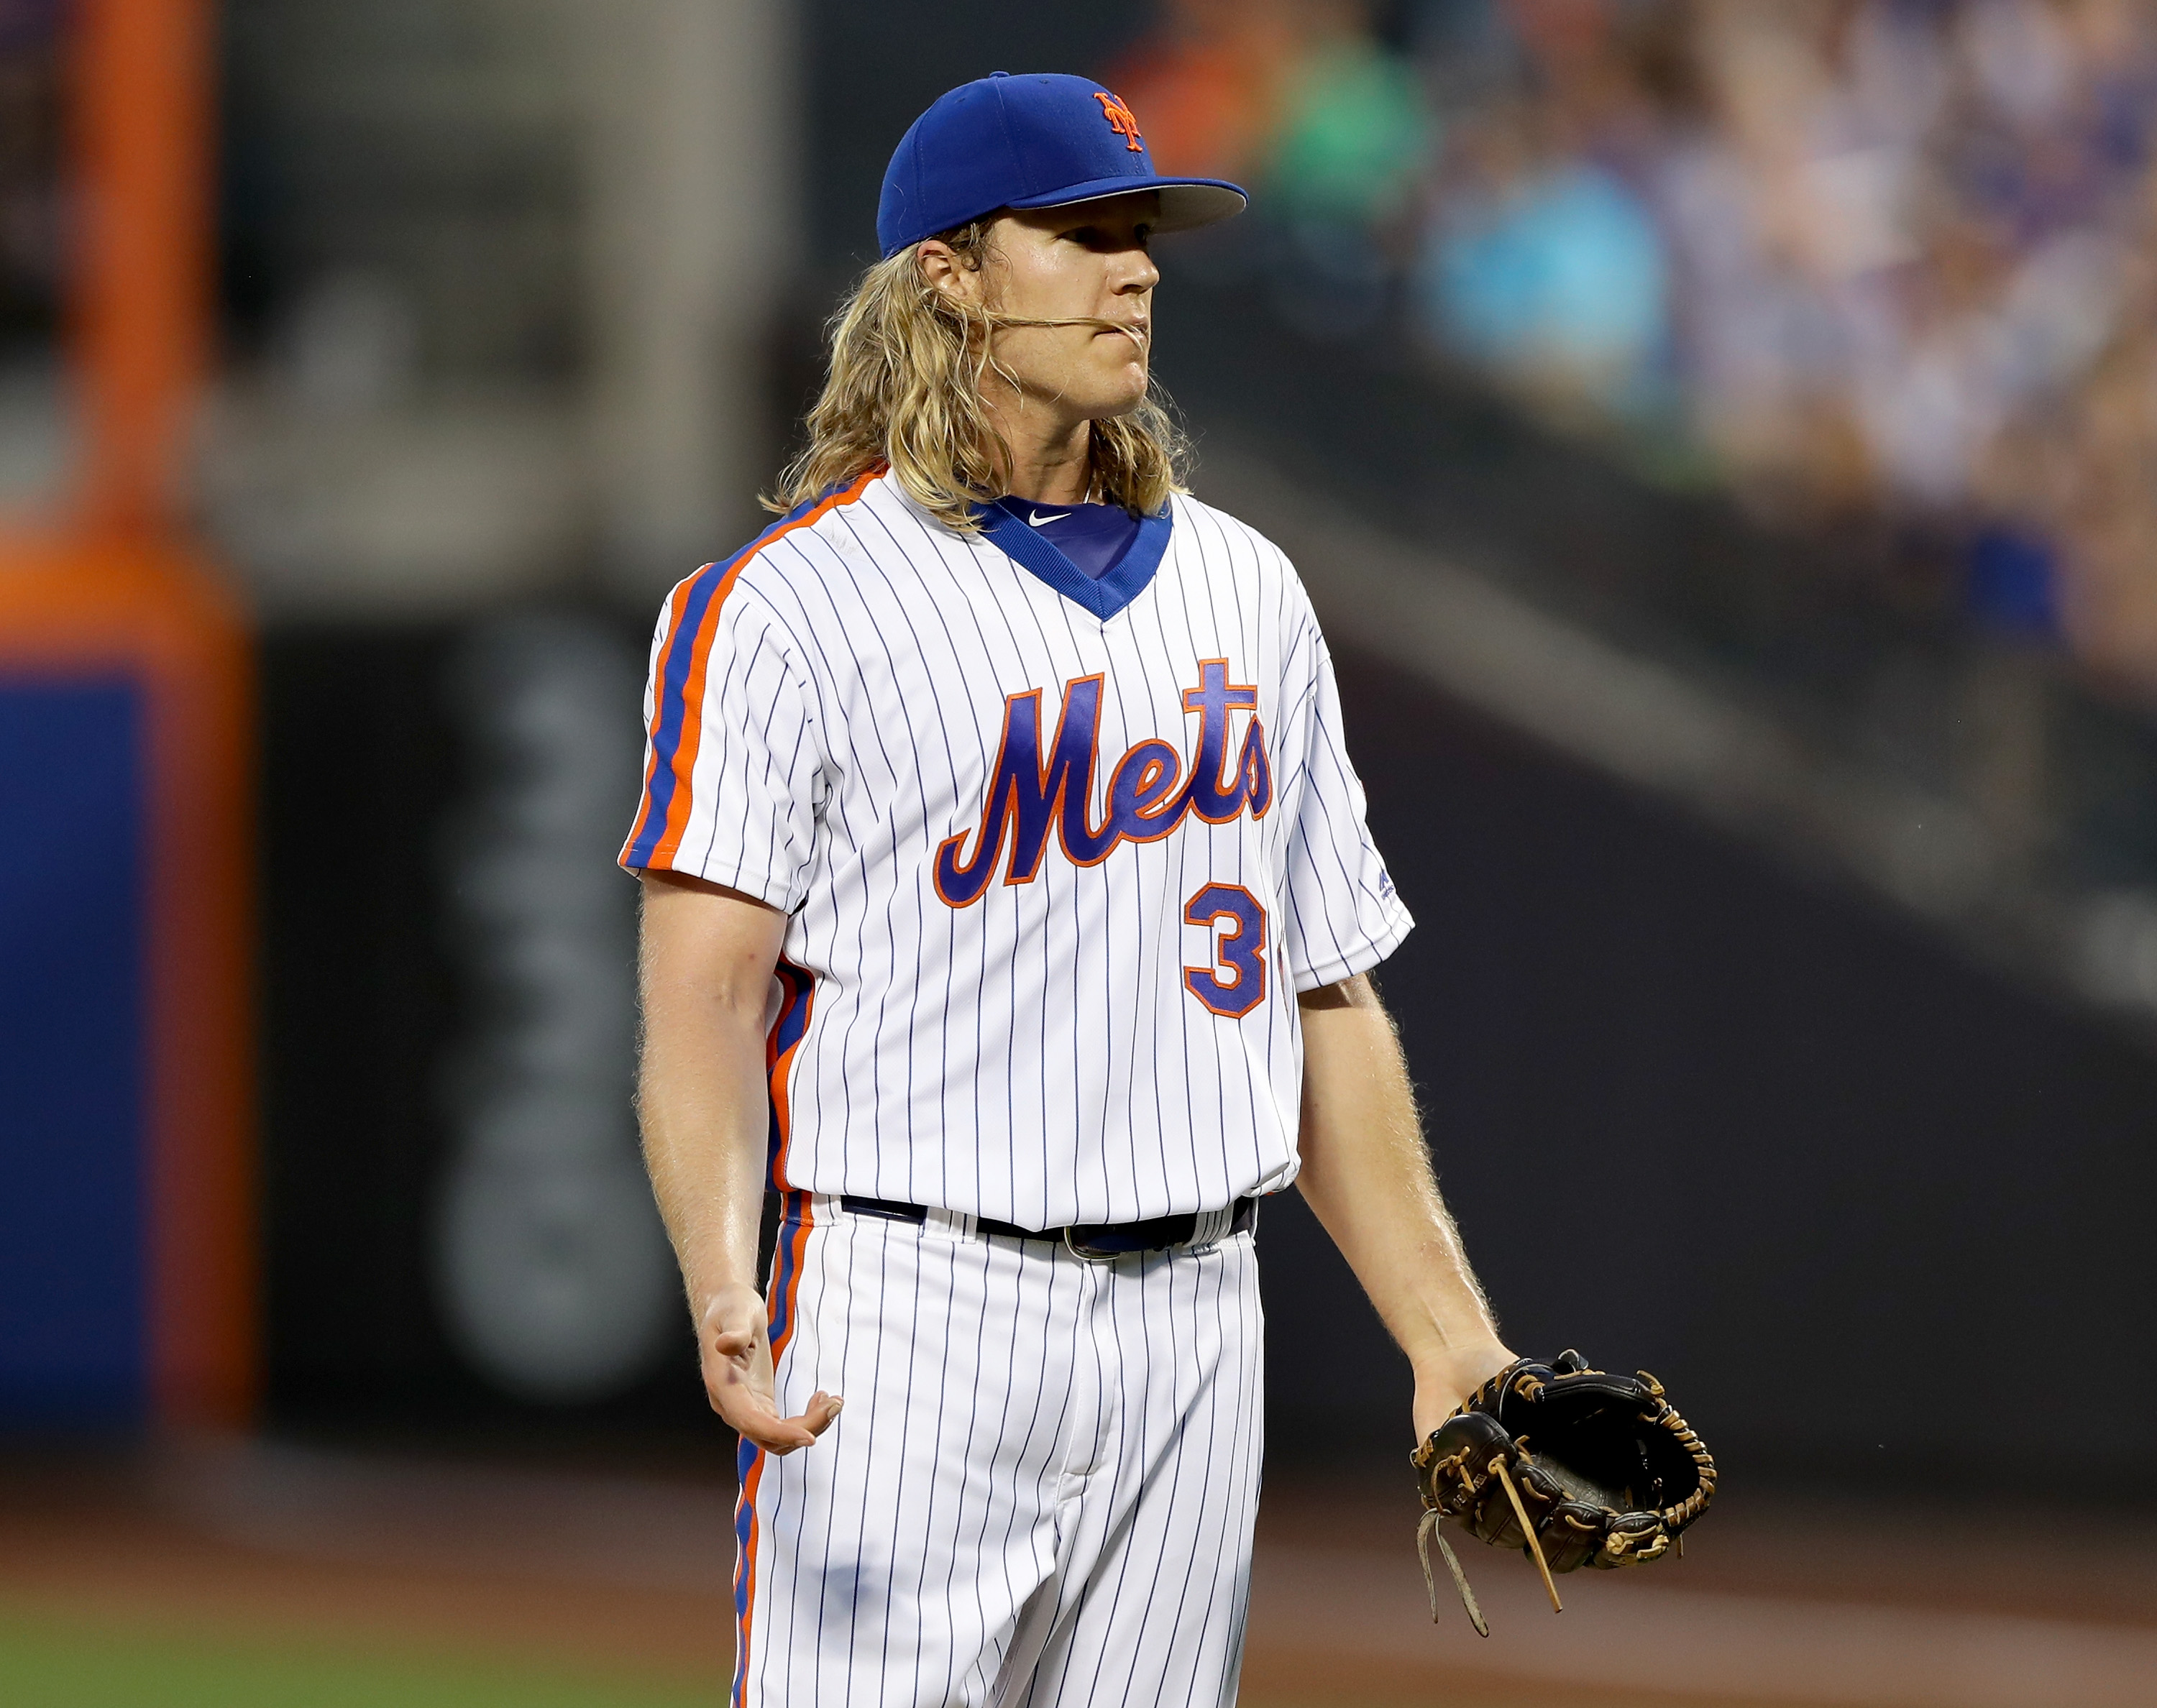 Mets' Noah Syndergaard ejected after throwing behind Chase Utley